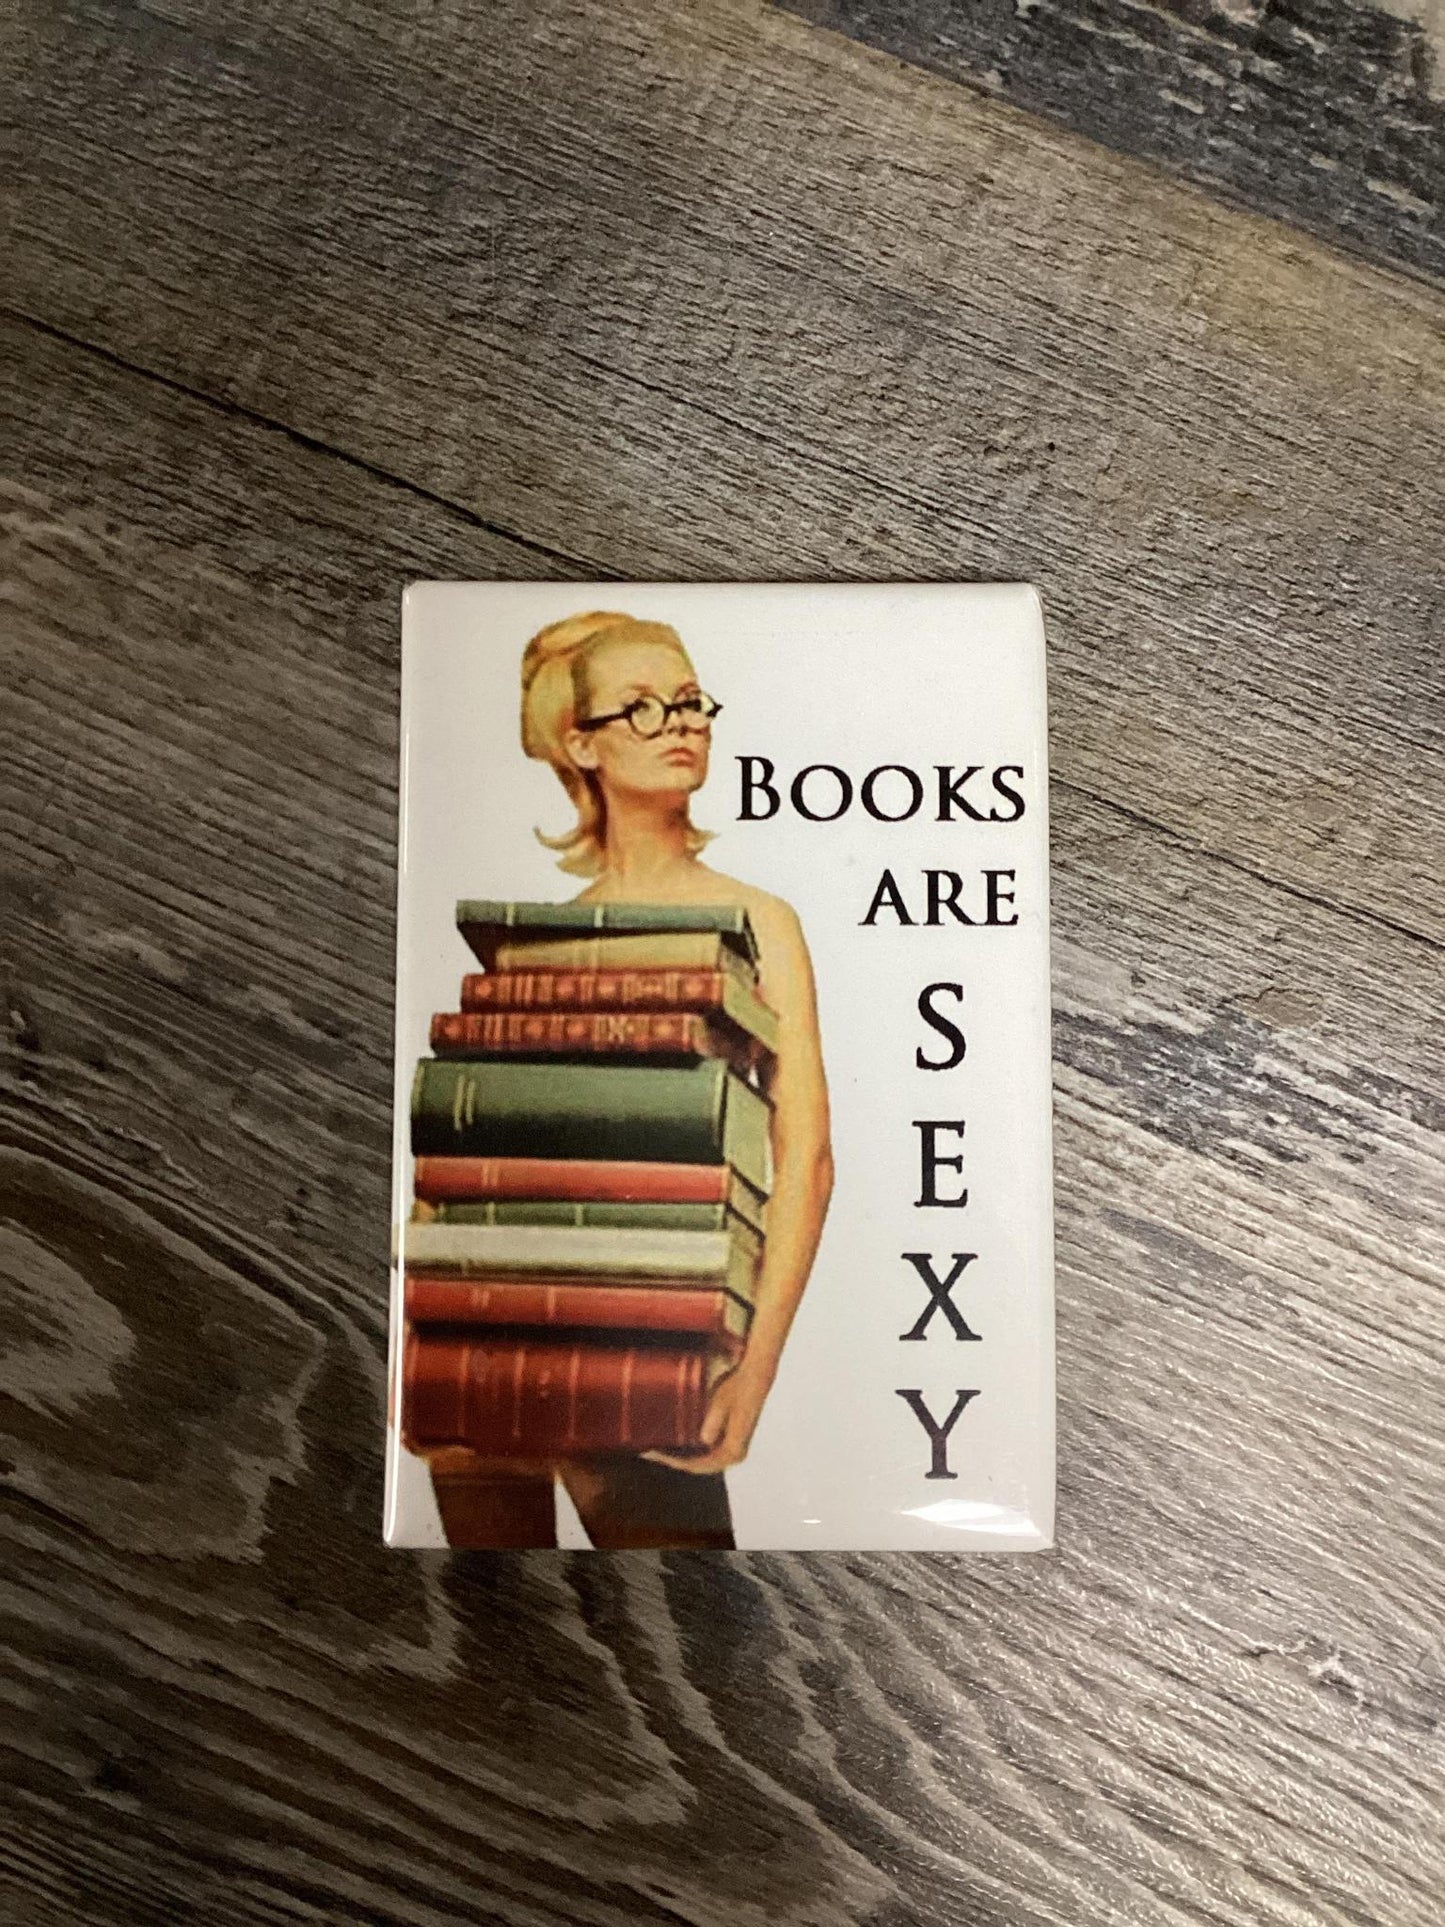 "Book Are Sexy" Magnet